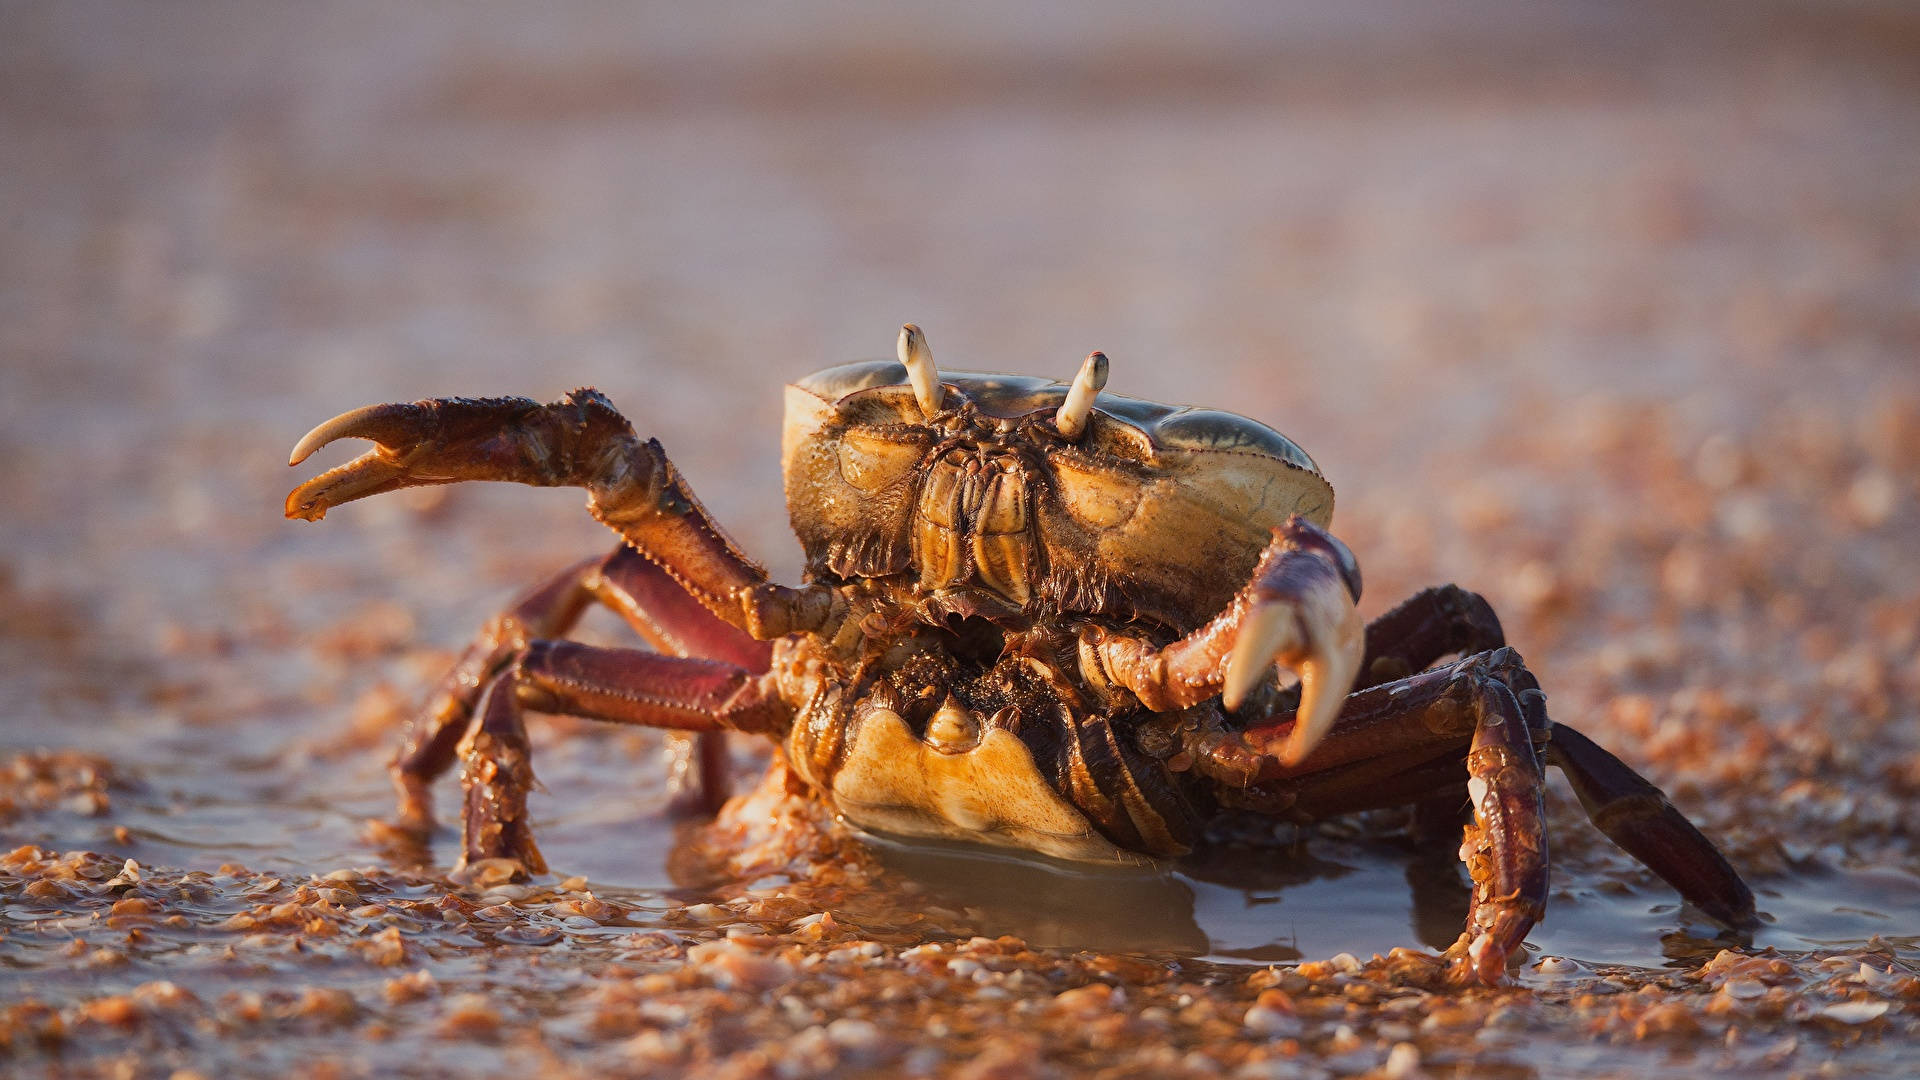 Crab In Muddy Water Background